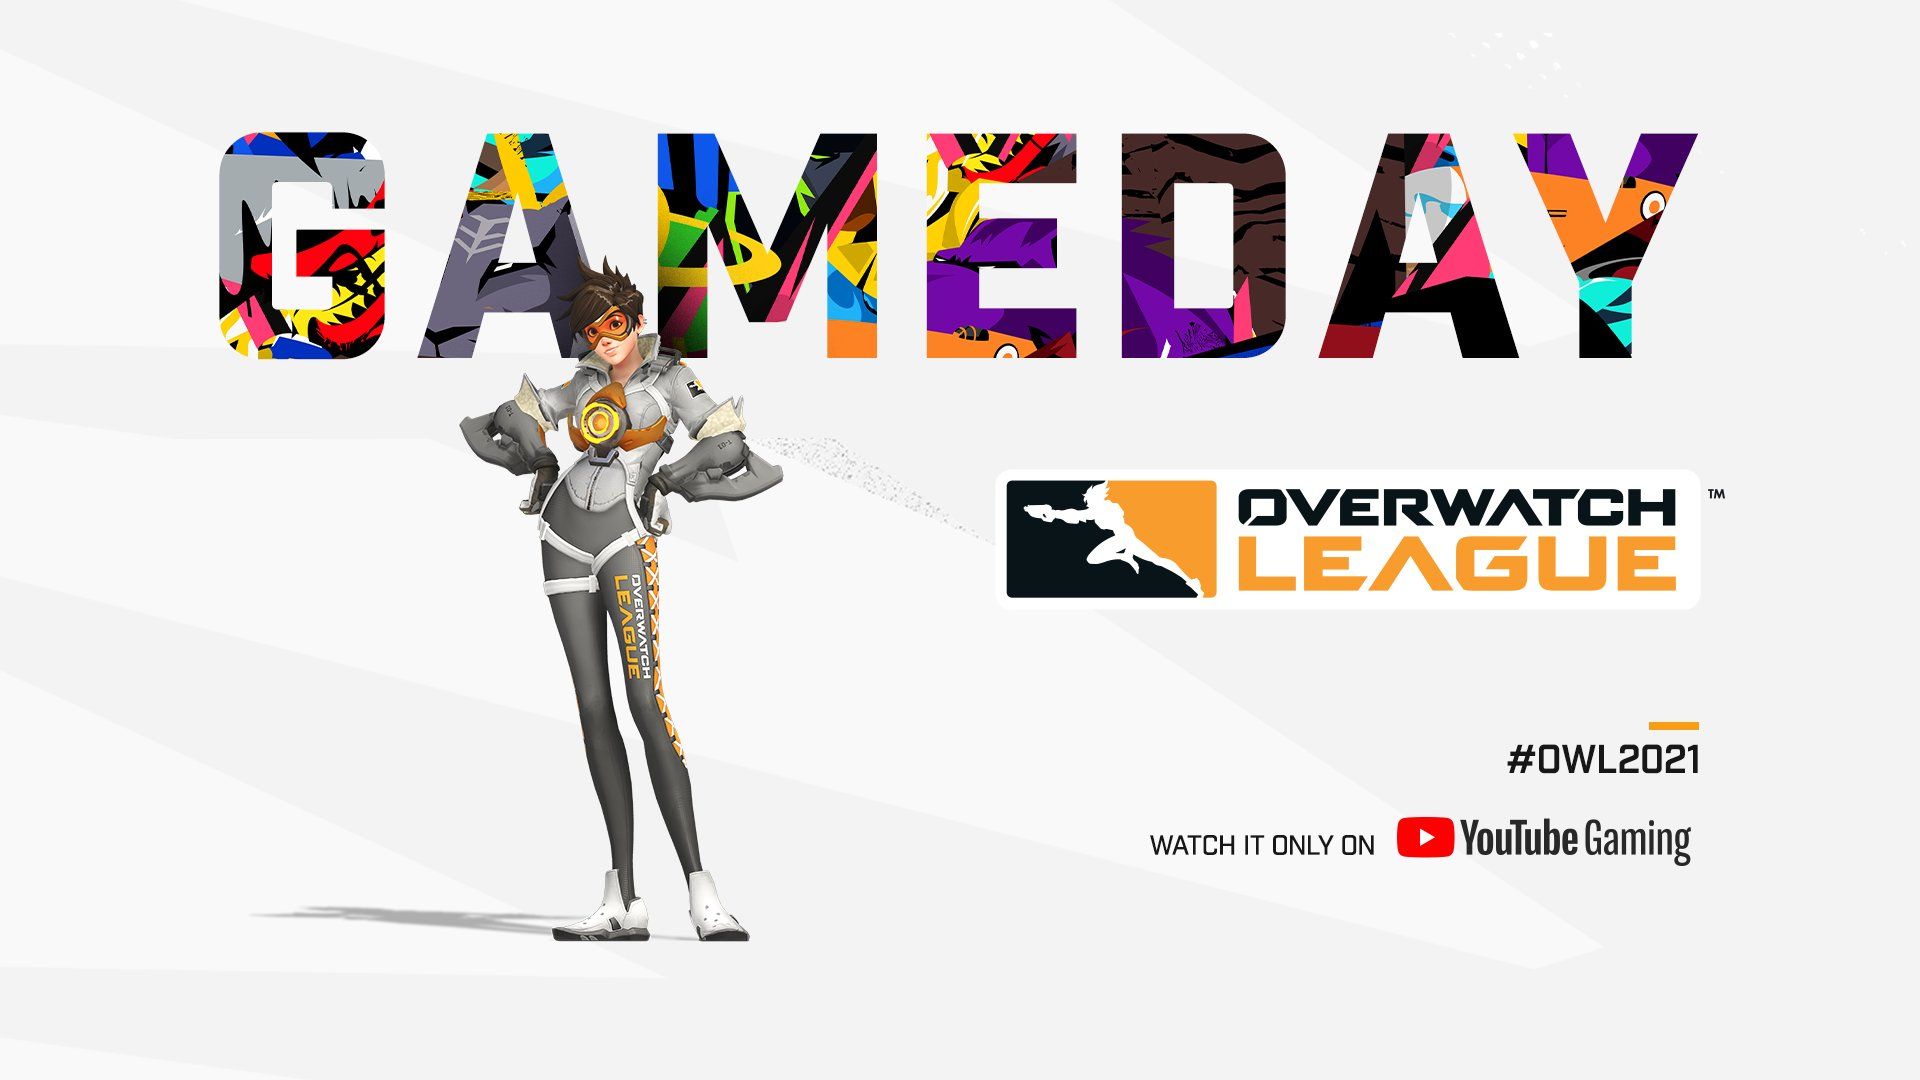 earn more overwatch league tokens